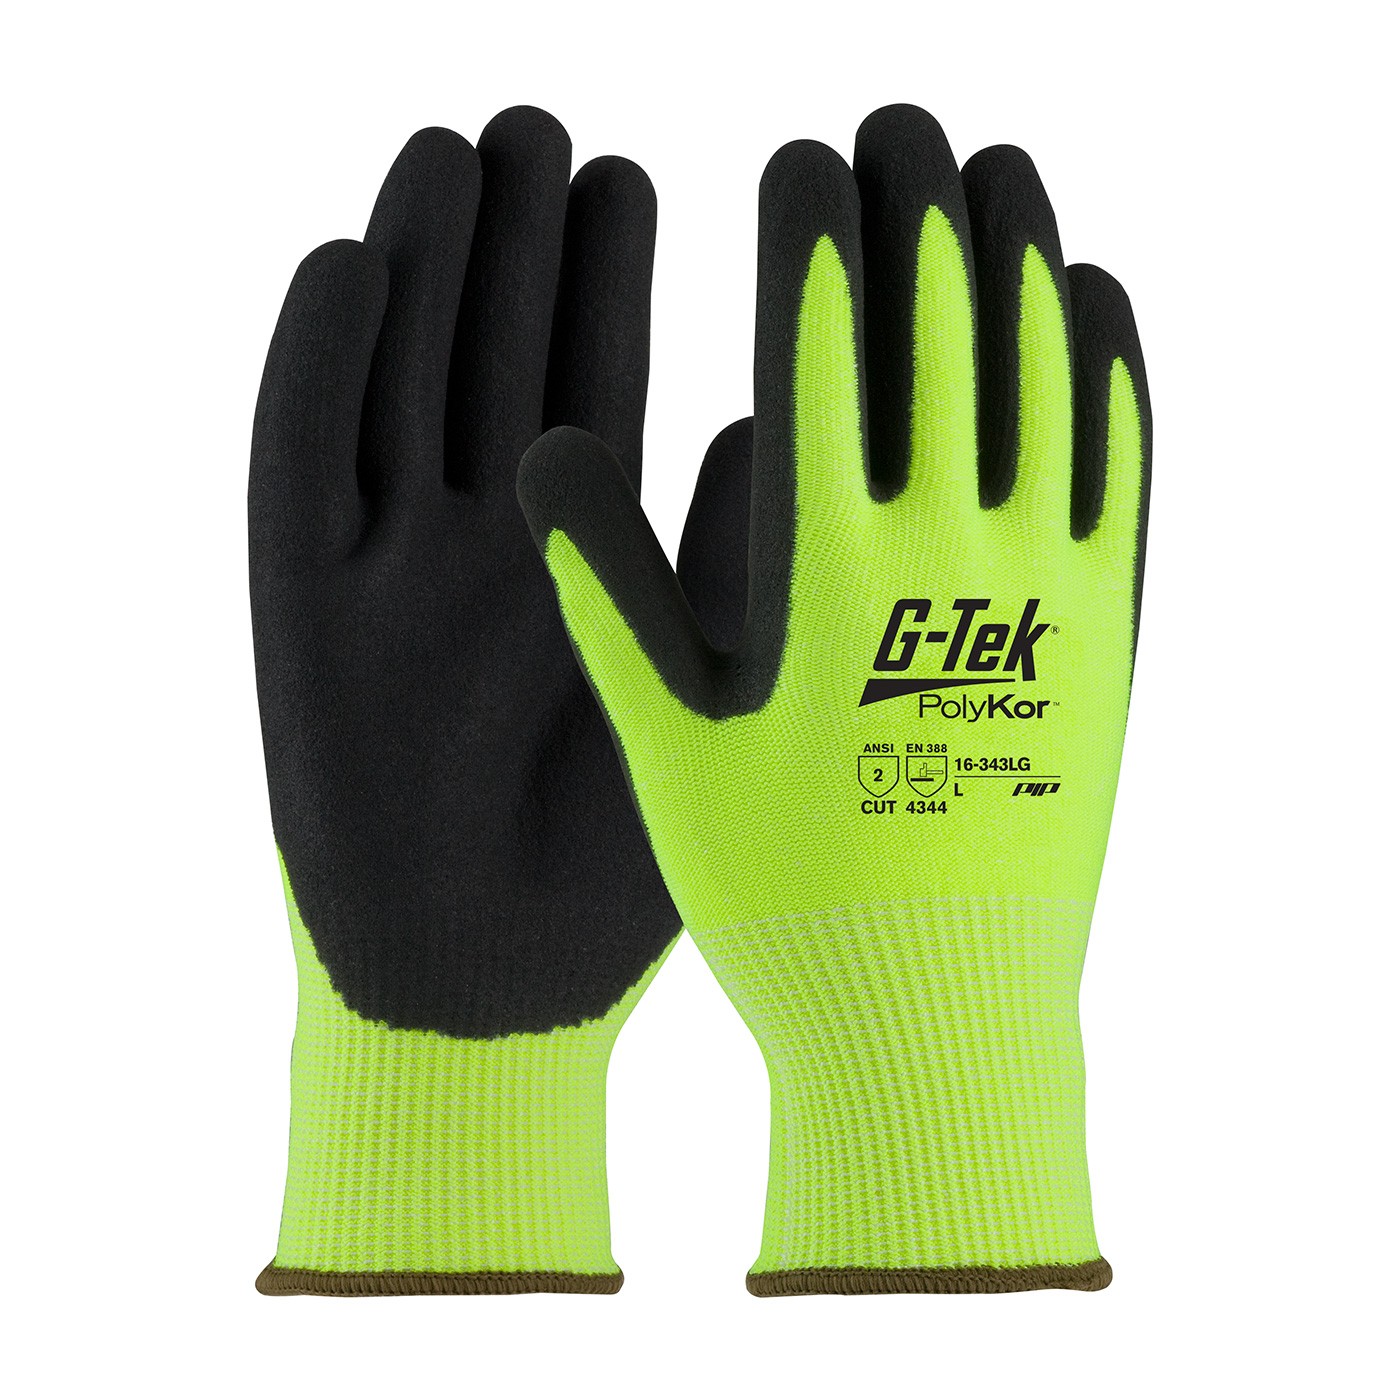 G-Tek® PolyKor® Hi-Vis Seamless Knit PolyKor® Blended Glove with Double-Dipped Nitrile Coated MicroSurface Grip on Palm & Fingers  (#16-343LG)